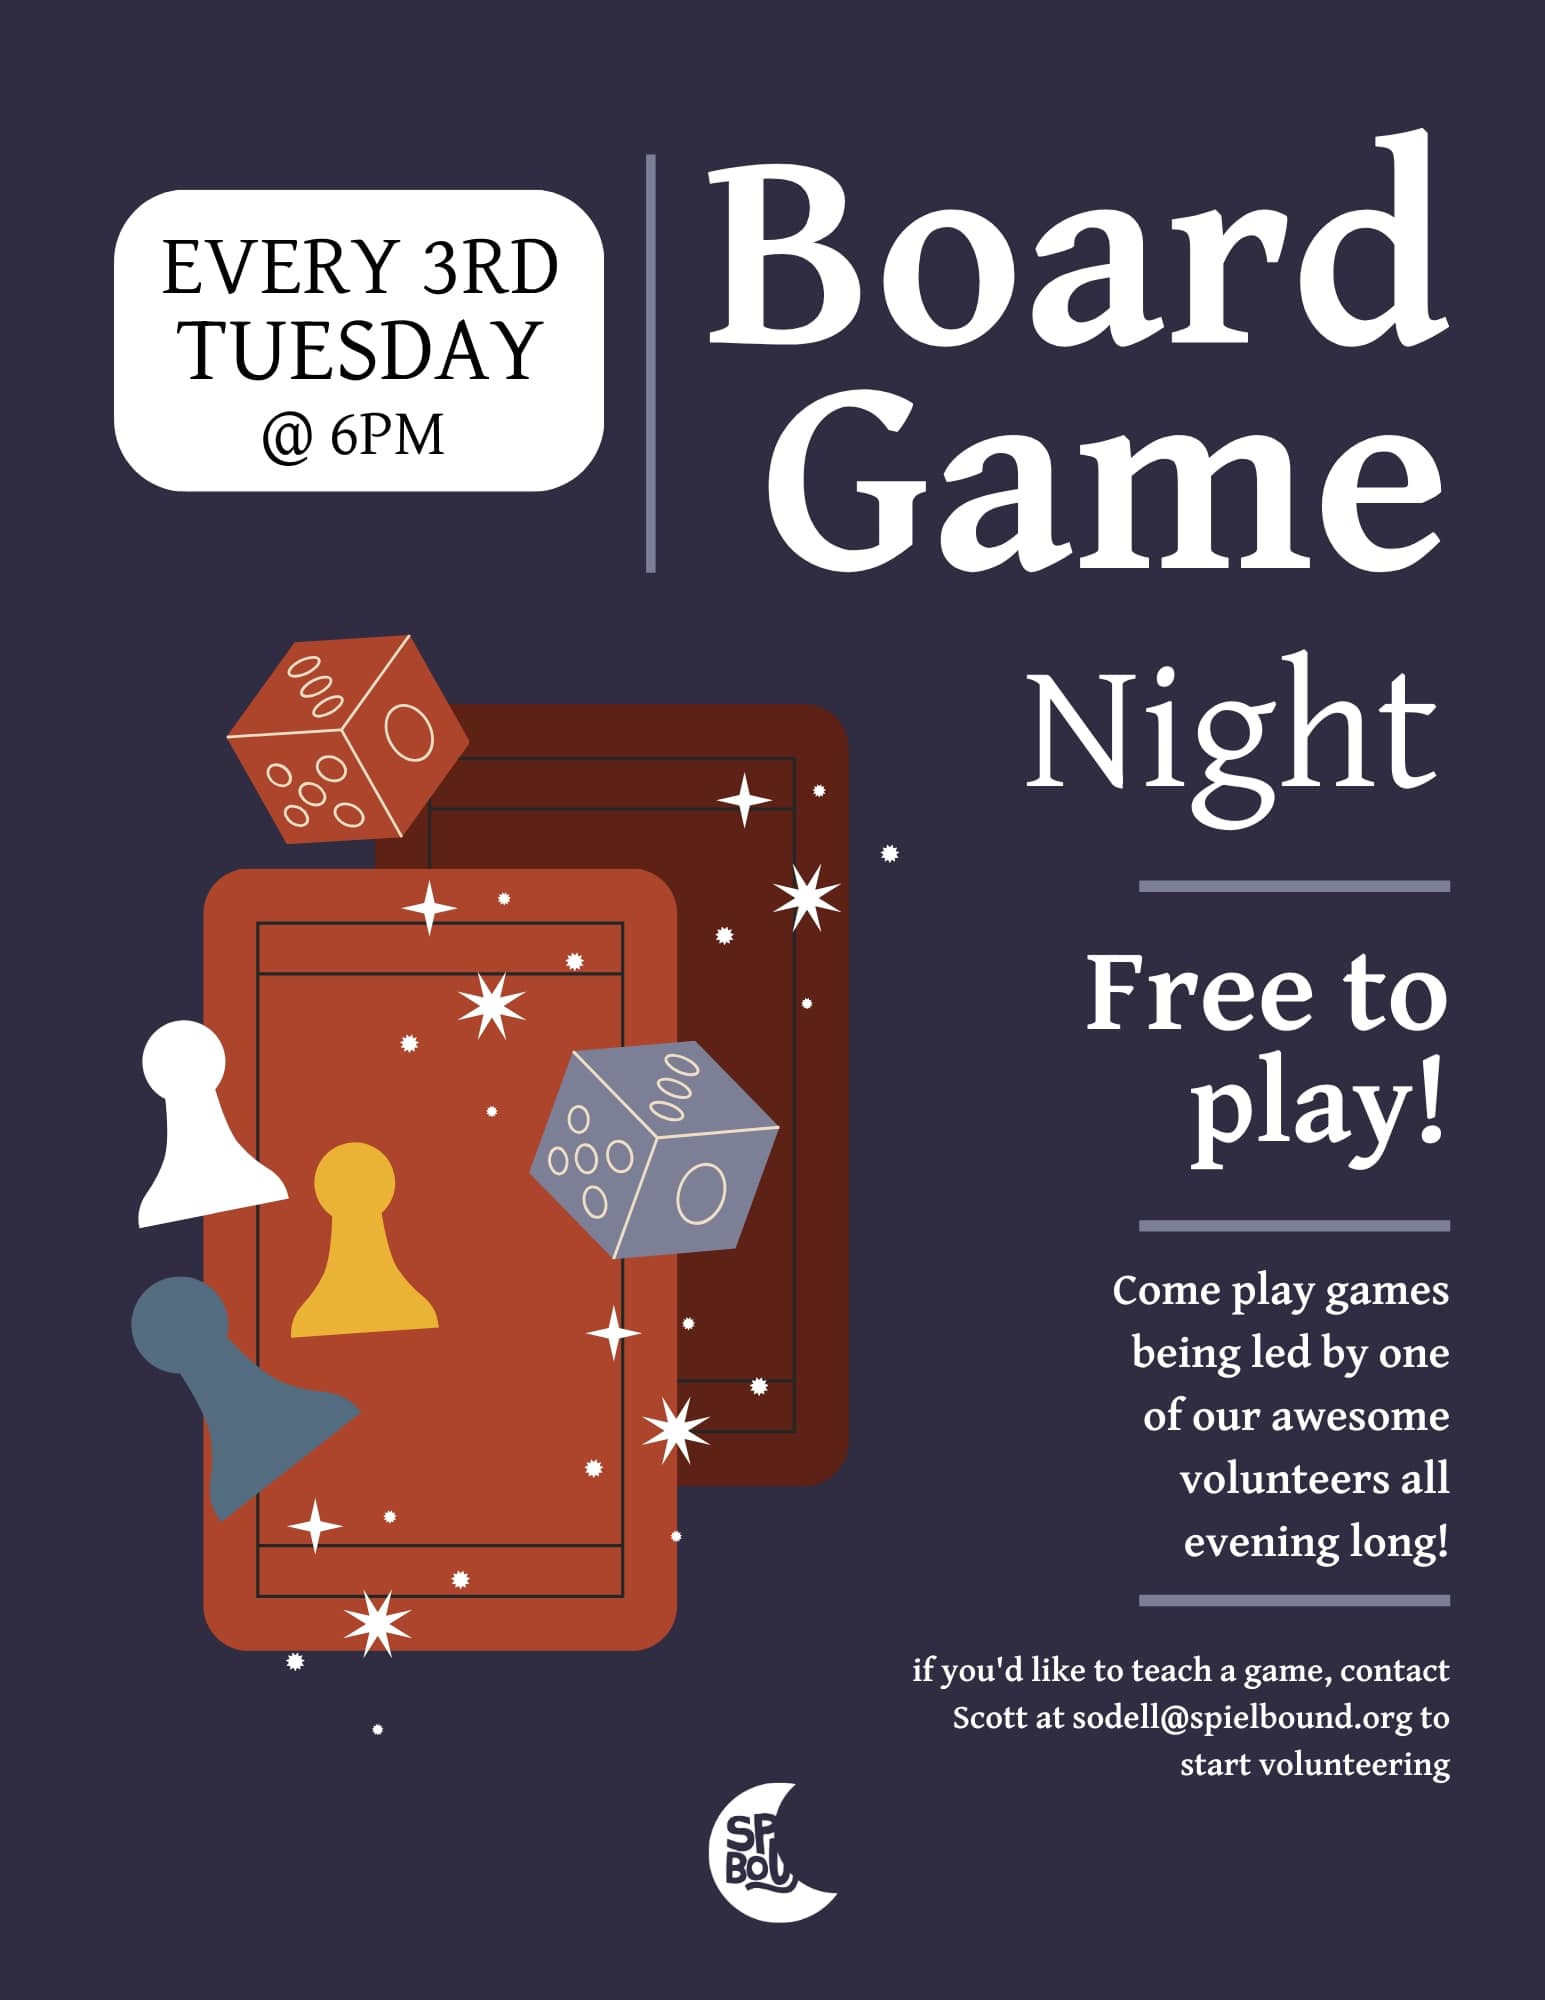 Board Game Nights every third Tuesday!